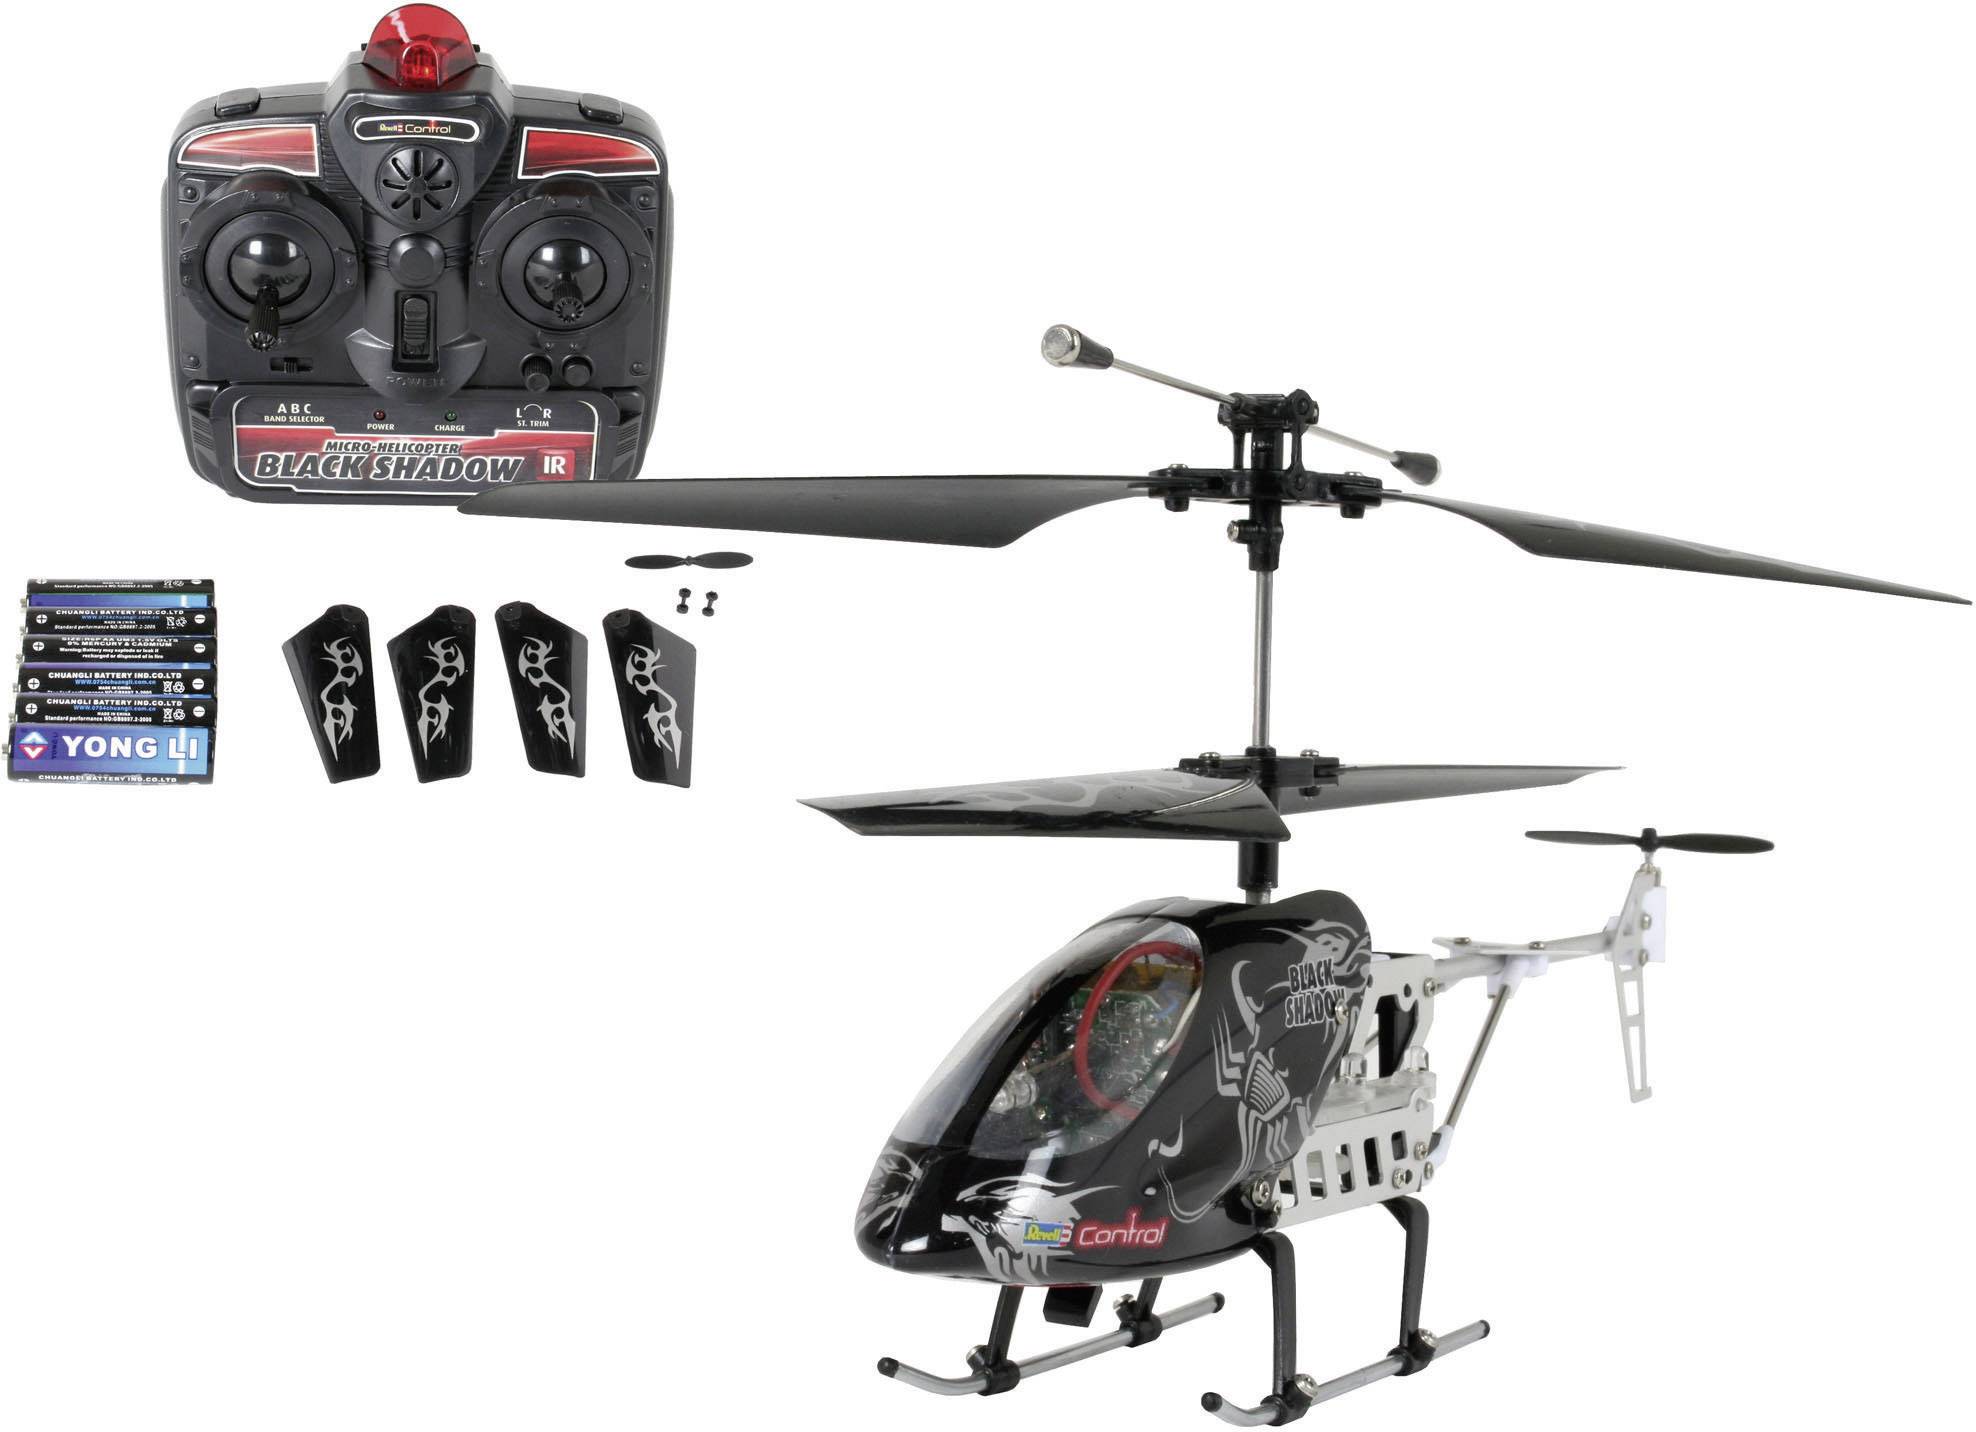 shadow infrared control helicopter